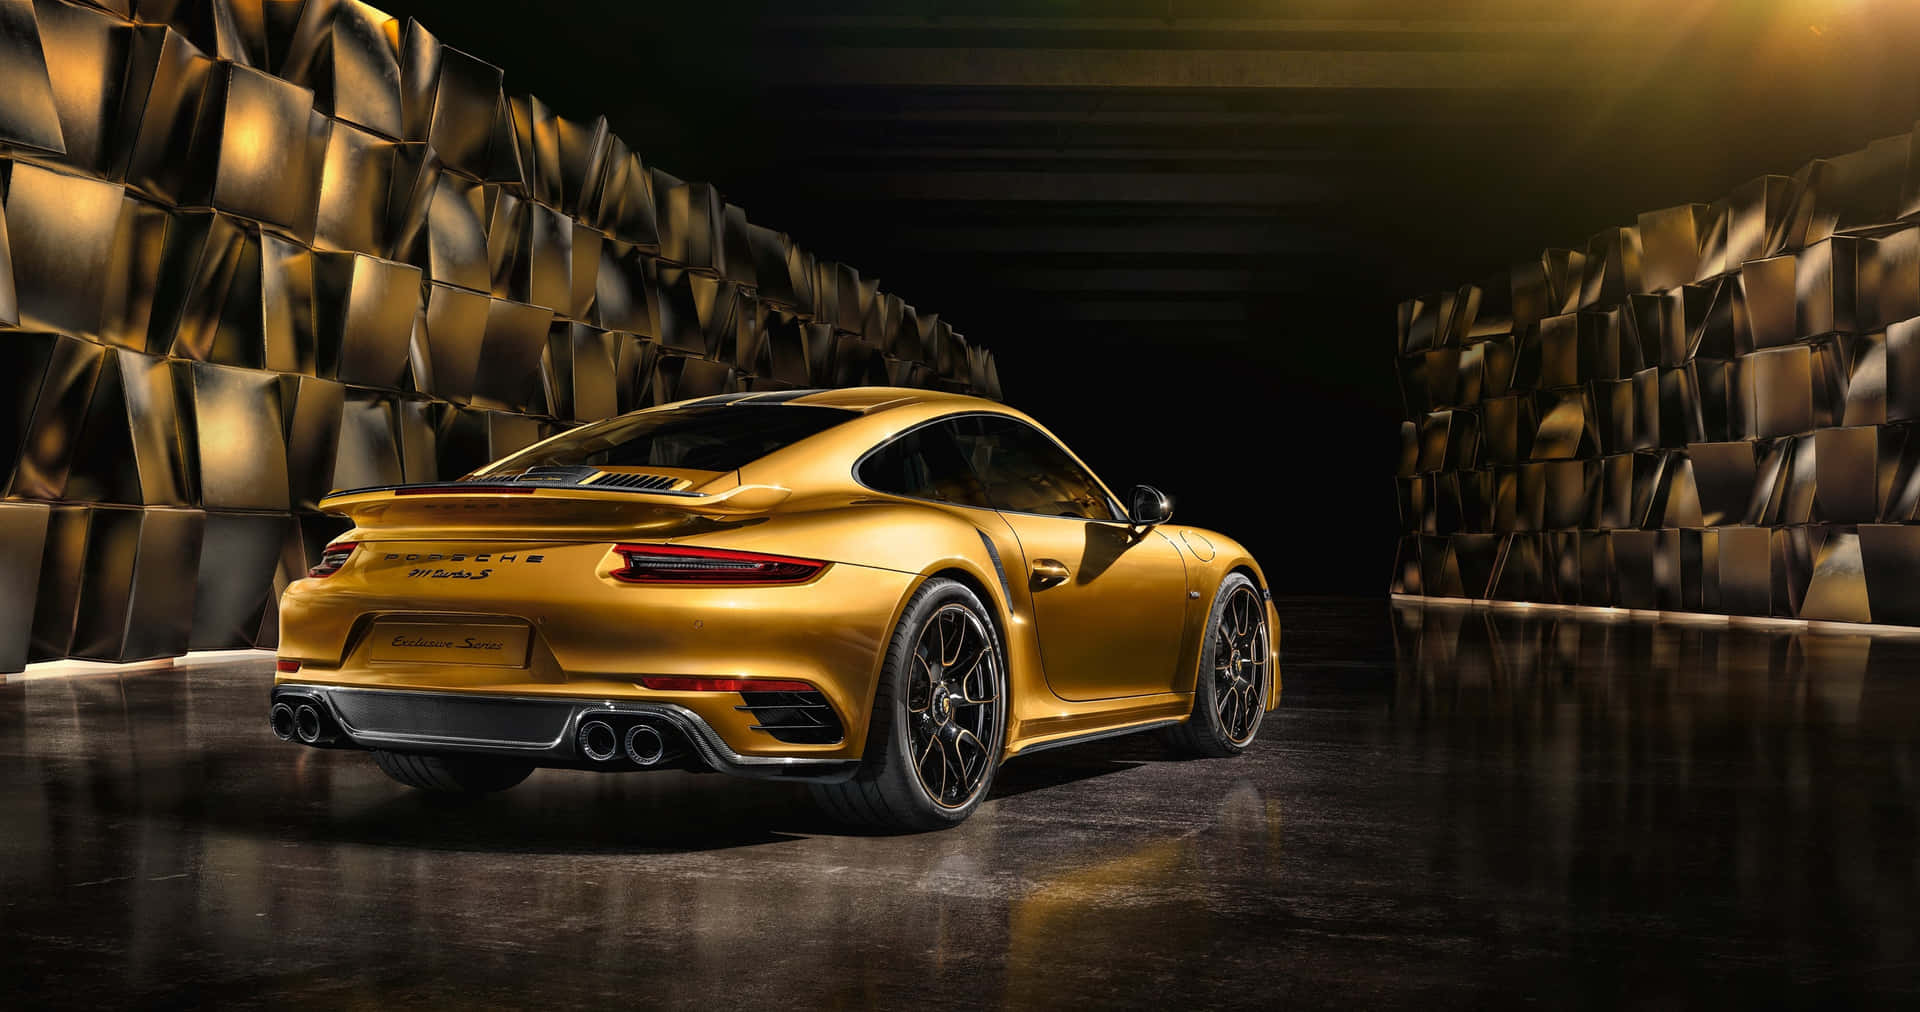 A 3d Illustration Of An Elegant And Powerful Porsche In 4k Ultra Hd